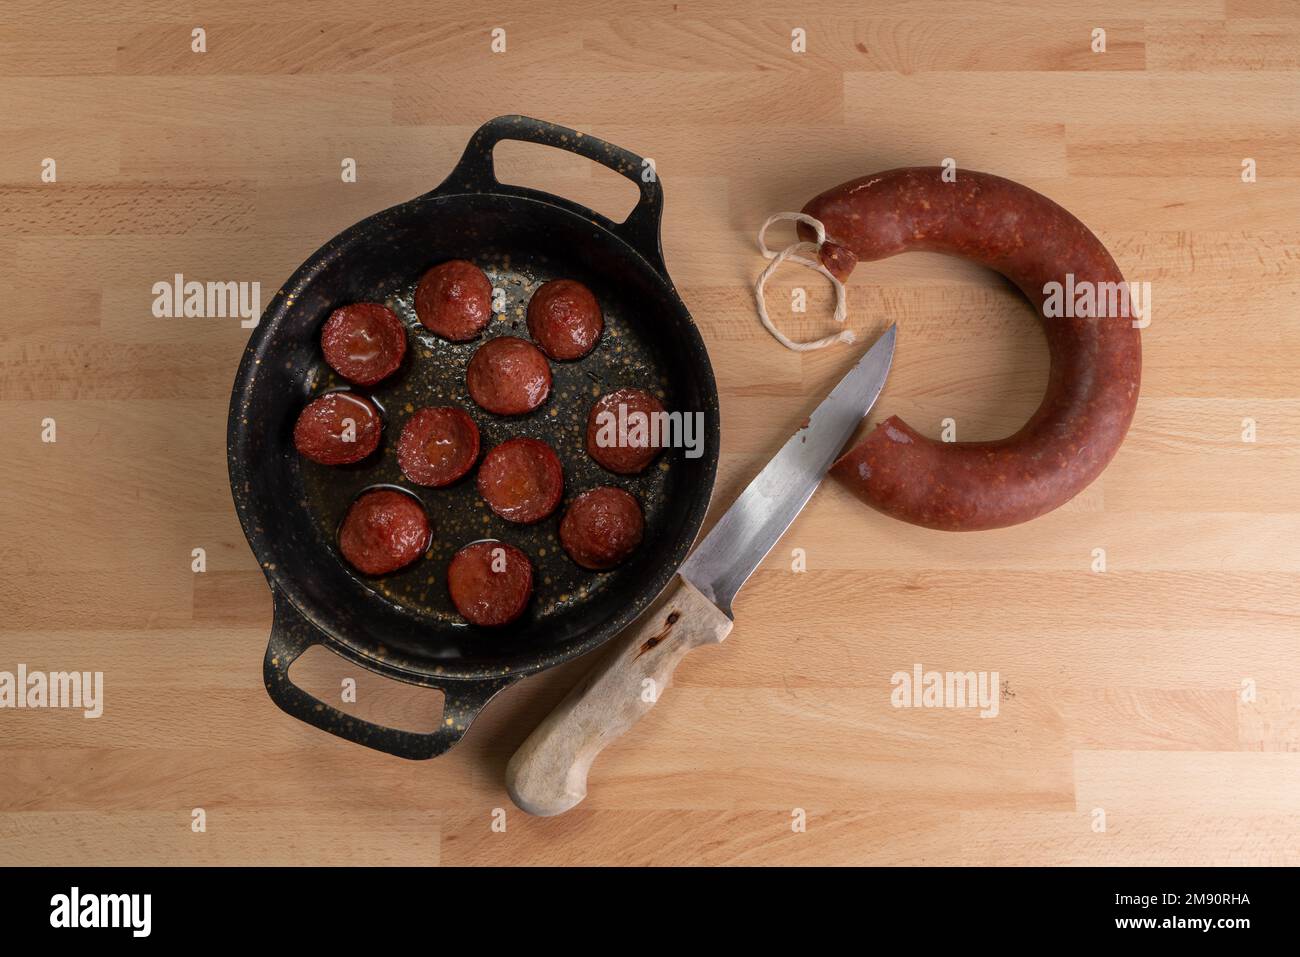 Top view of fried sausage slices in pan. Next to the frying pan are raw sausage and a knife on wooden background. Stock Photo